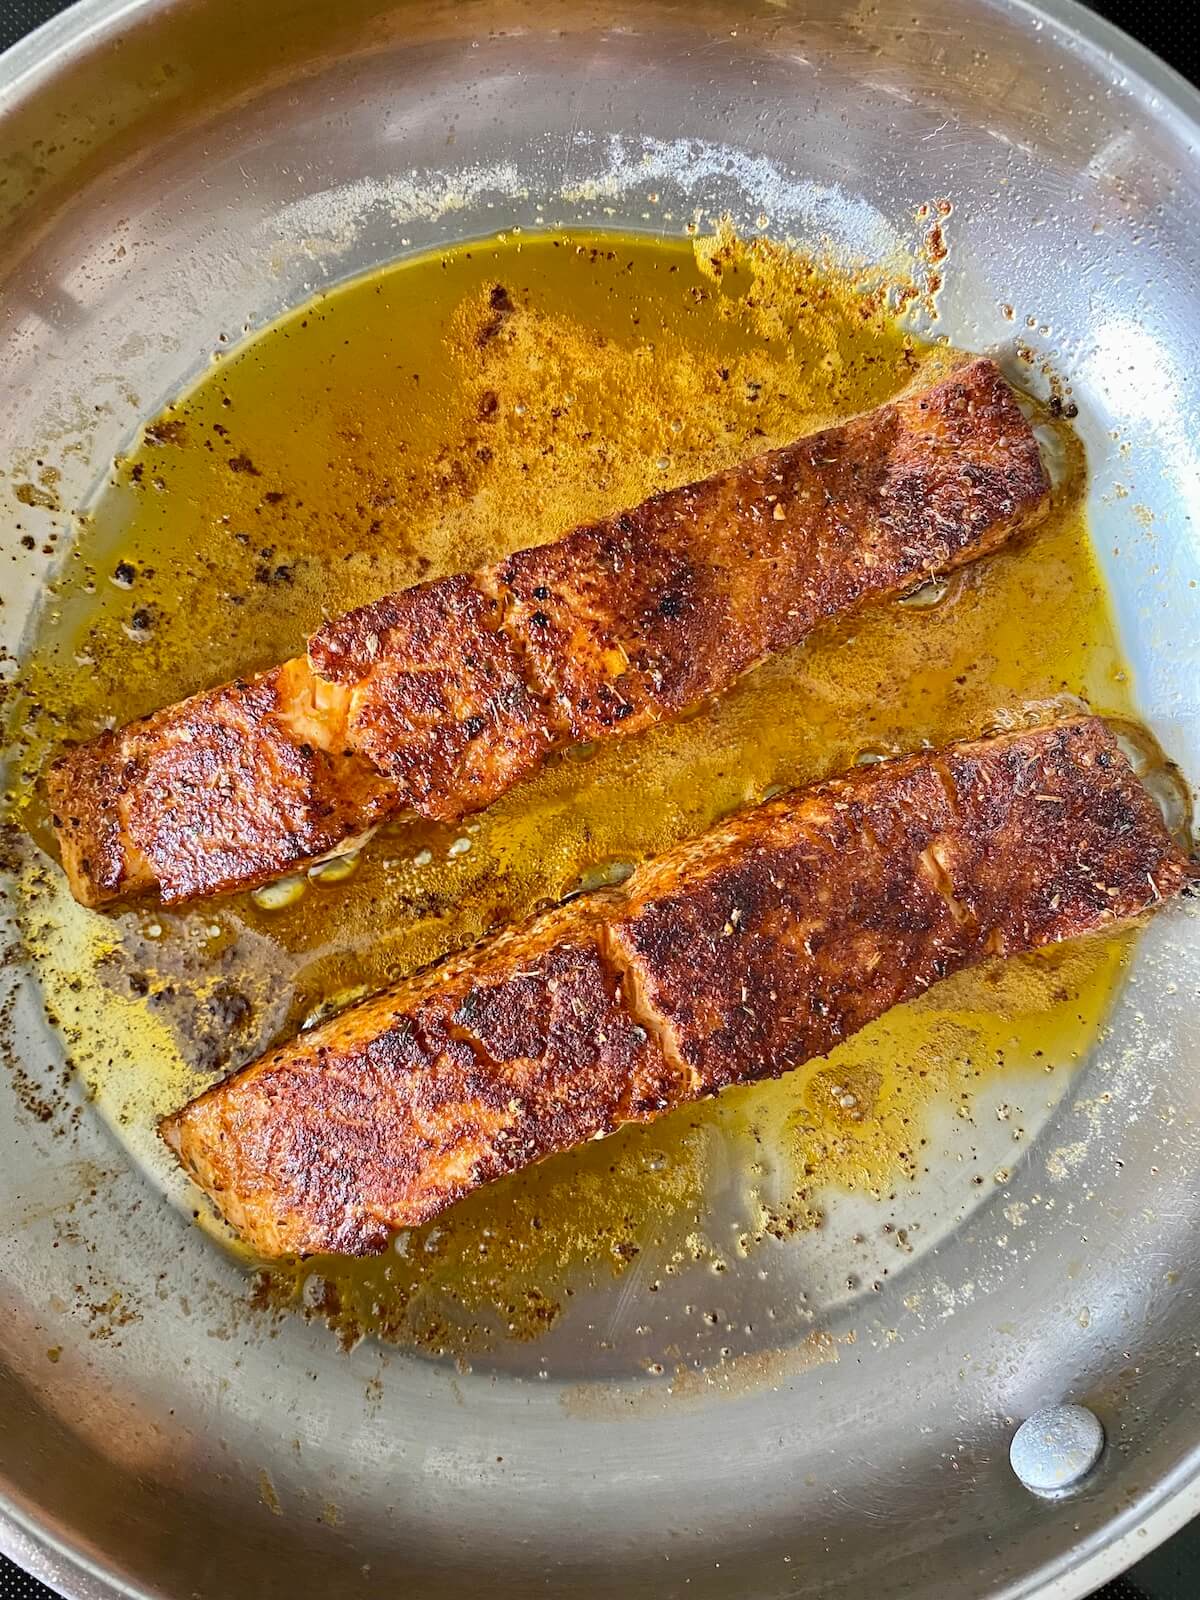 Two fillets of blackened salmon cooking in a stainless steel pan.